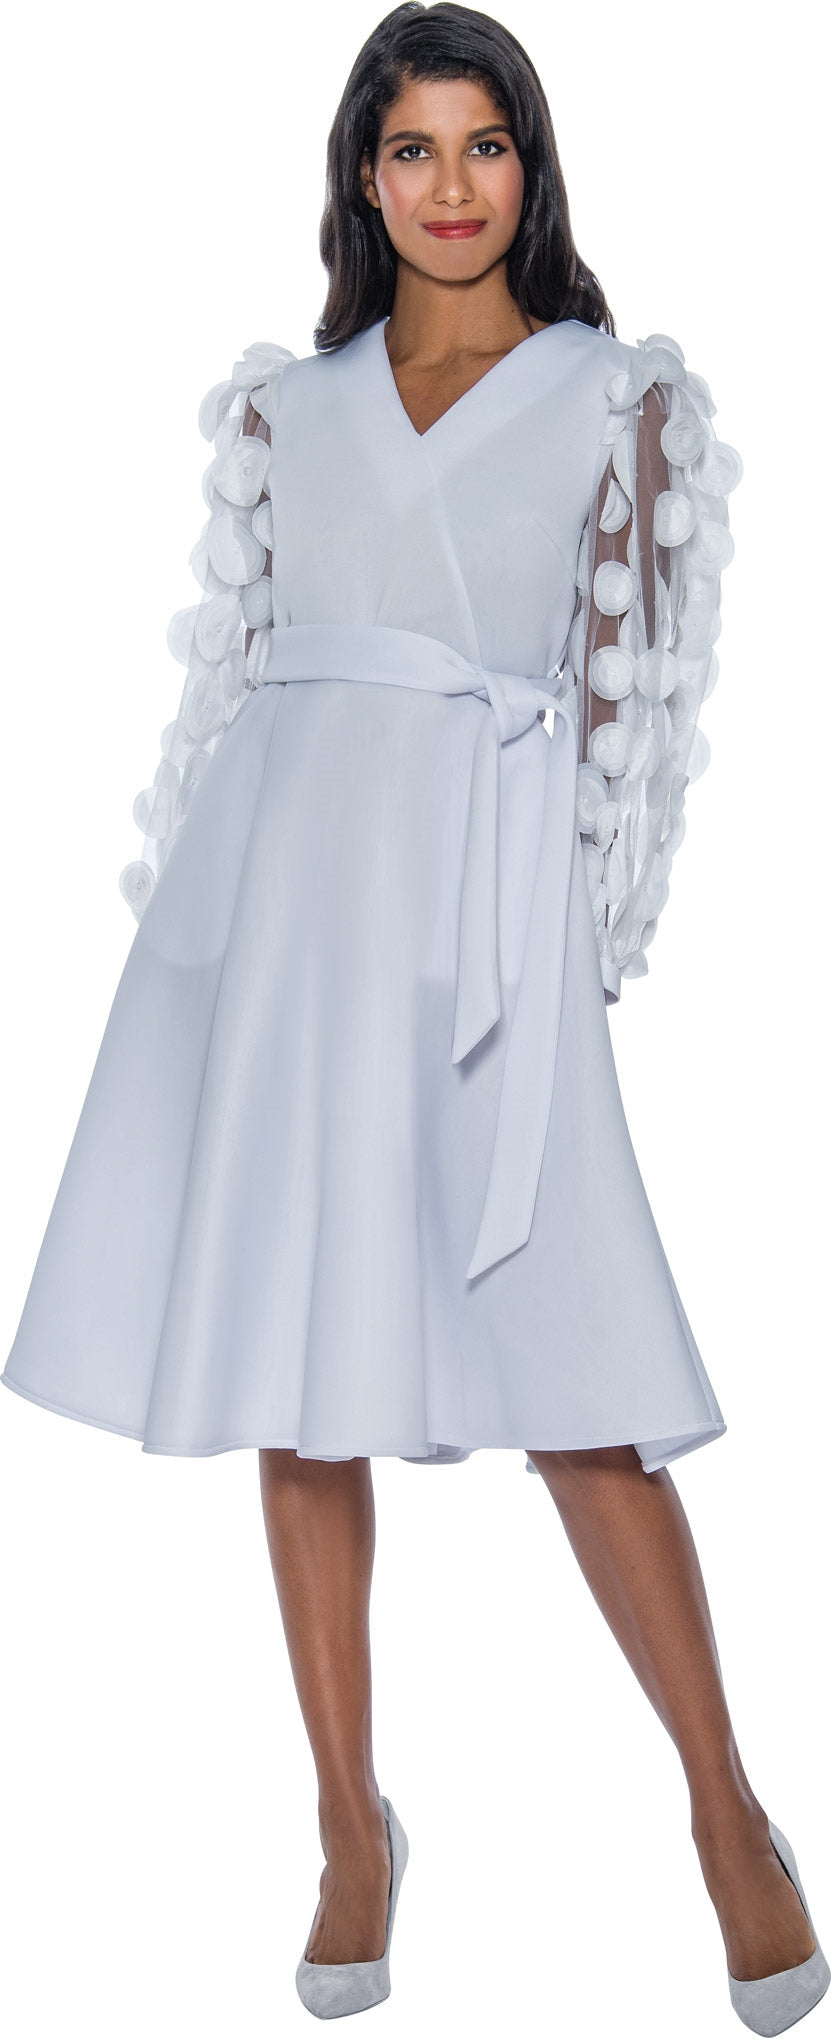 Church Dress By Nubiano 921C-White - Church Suits For Less